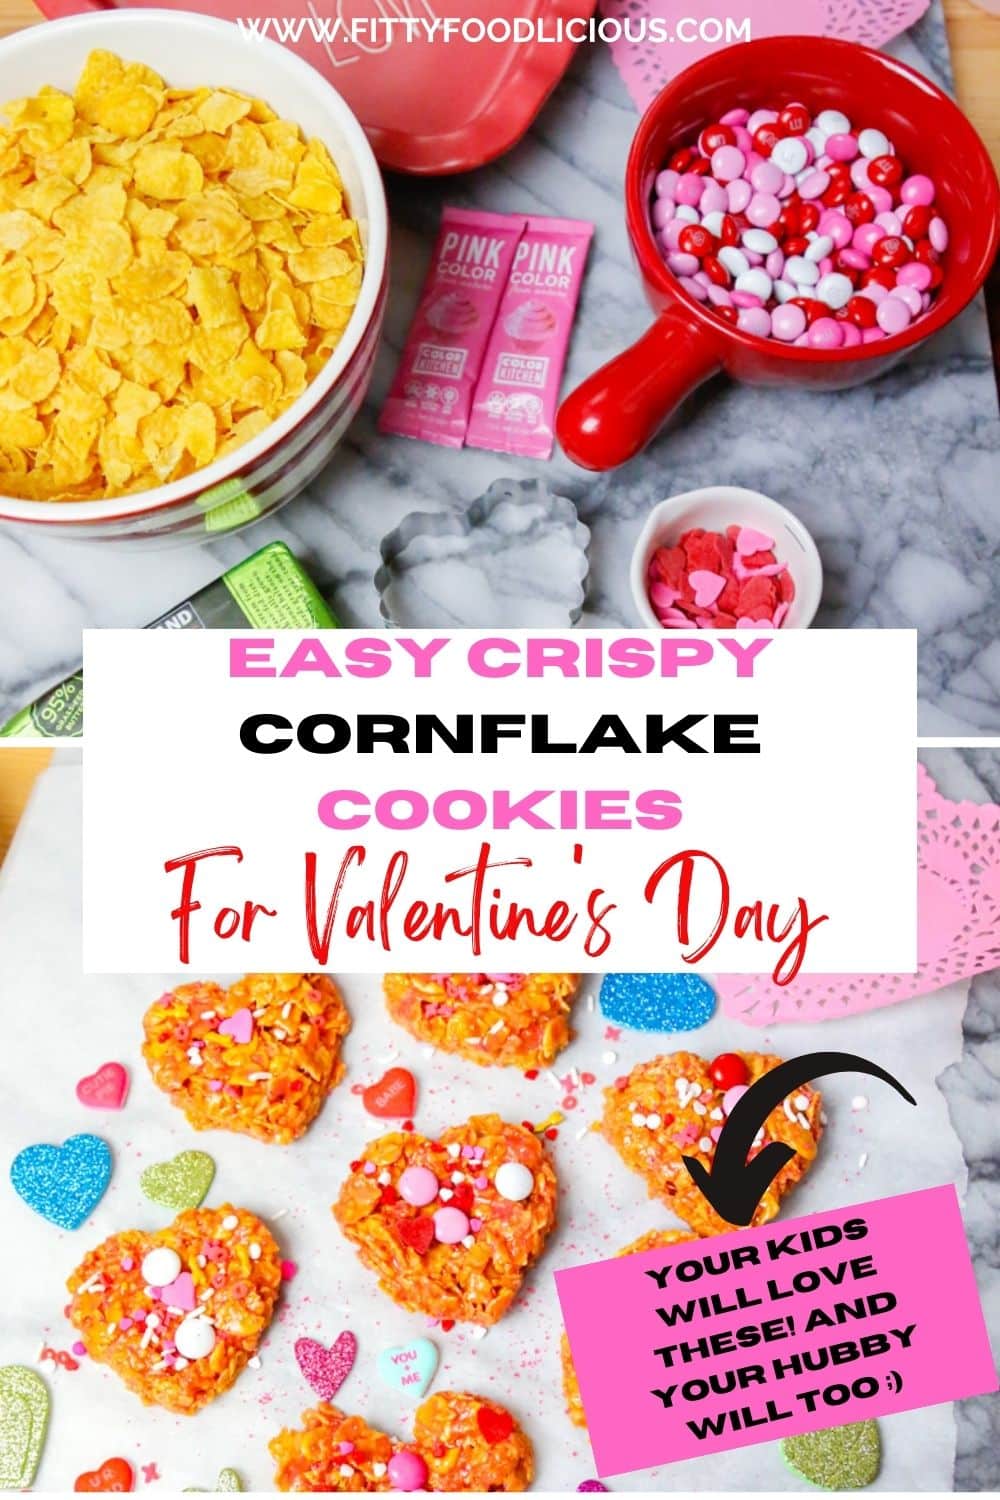 Pinterest image for crispy cornflake cookies for Valentine's Day 